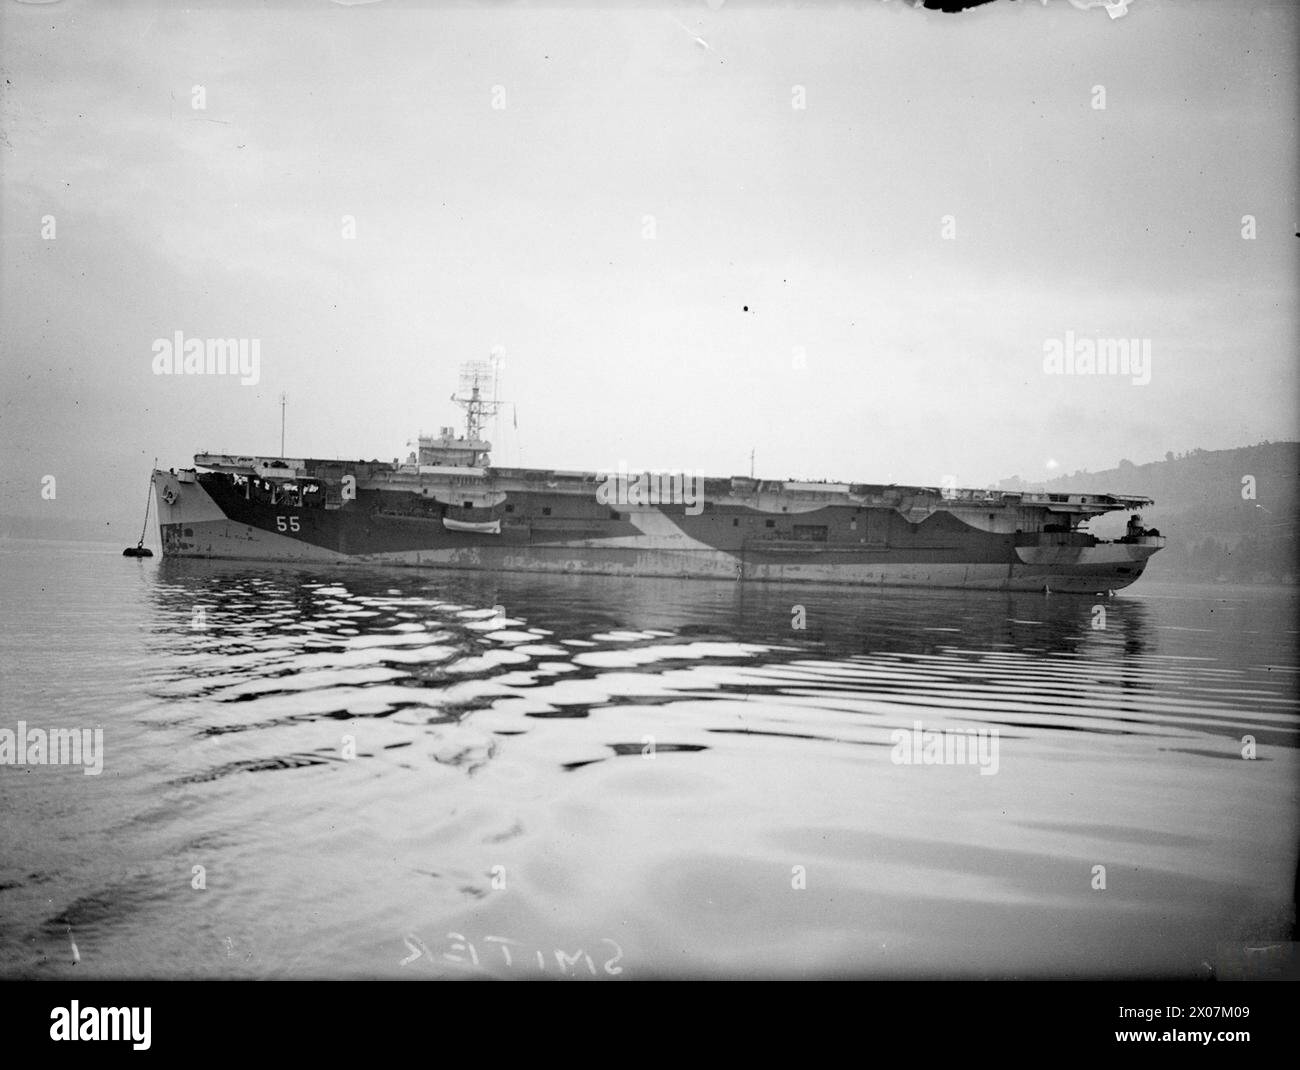 HMS SMITER, ESCORT CARRIER. 29 JULY 1944, GREENOCK. - HMS SMITER from the port side Stock Photo